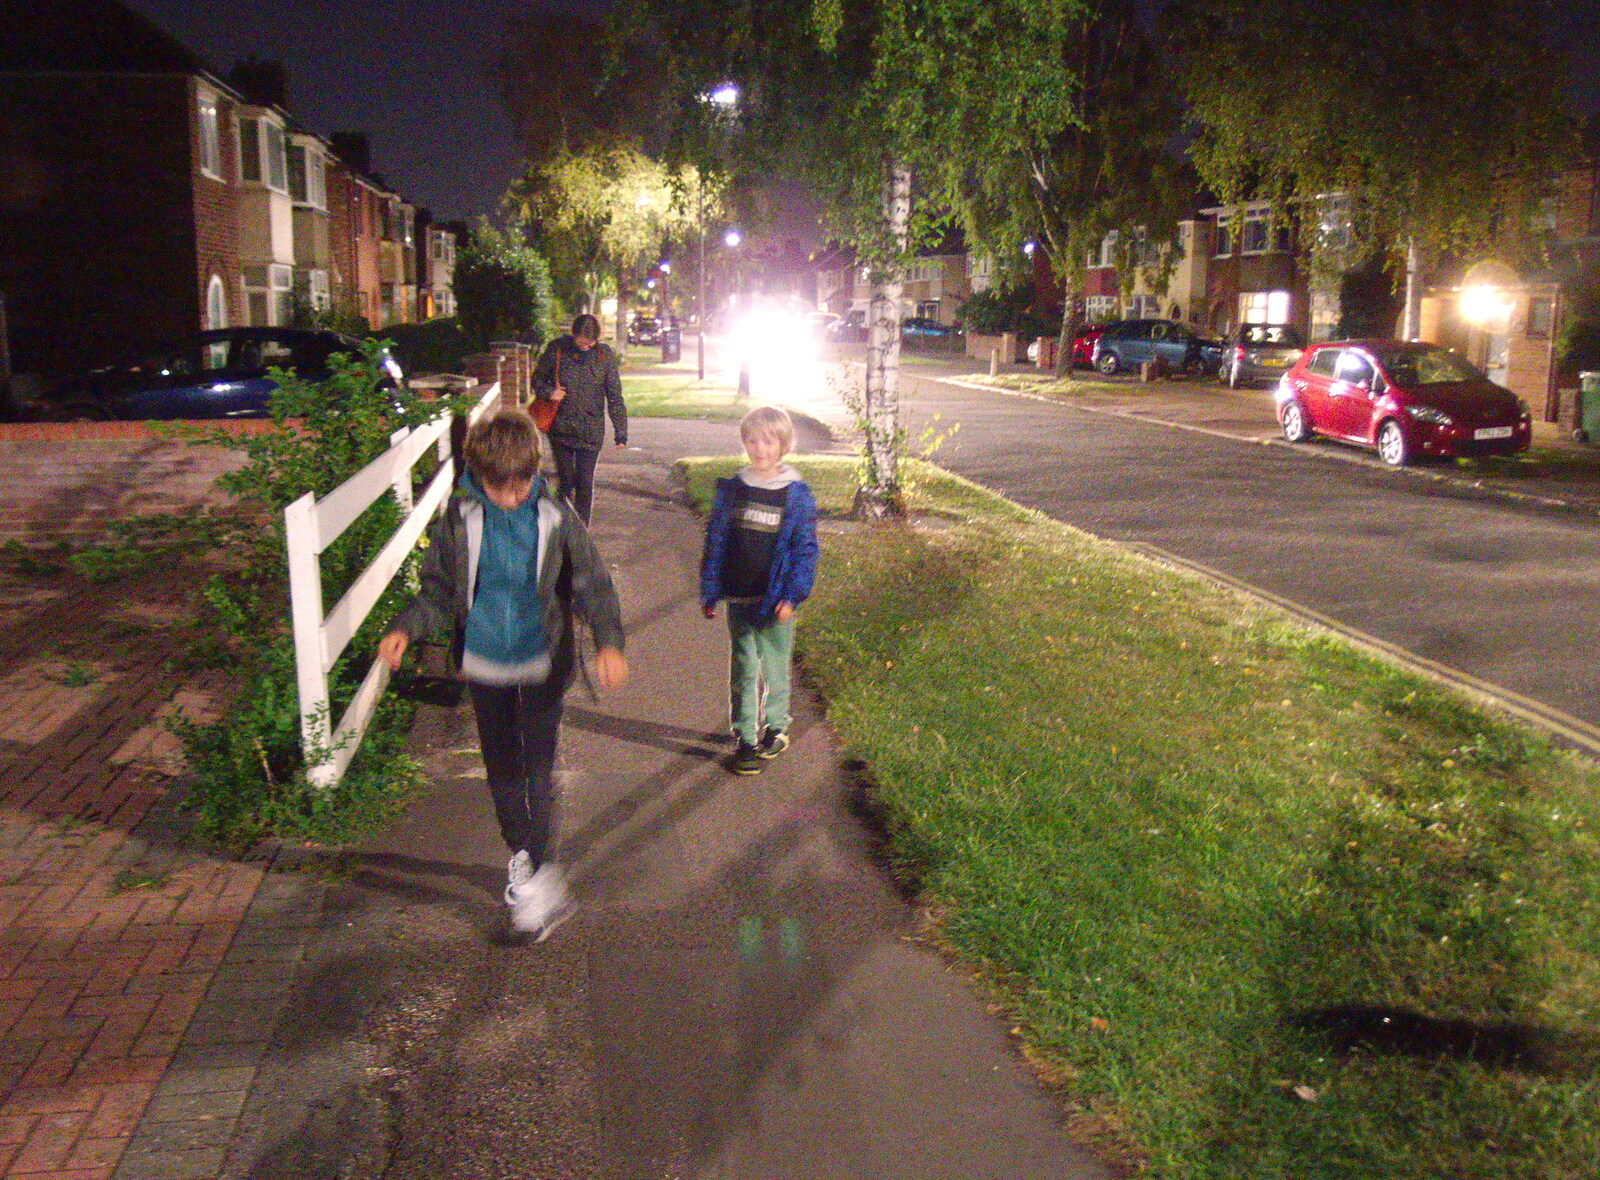 The gang back on Birdwood Road from A Musical Night on Mill Road, Cambridge - 8th September 2019